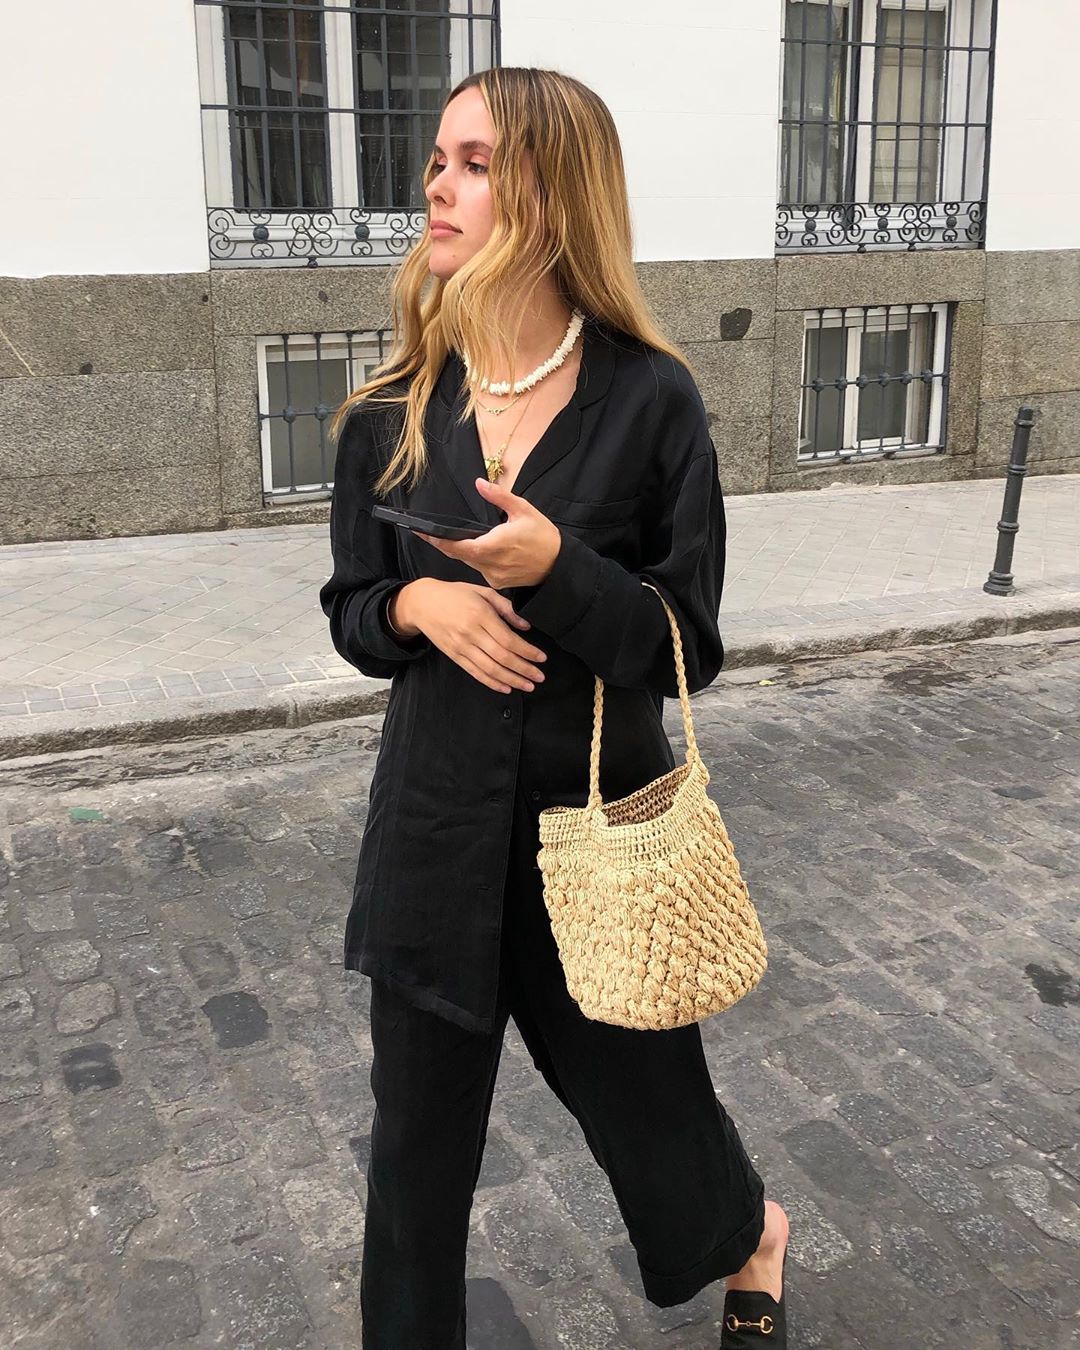 Topshop Beauty: Lucia Cuesta wearing black suit and straw bag